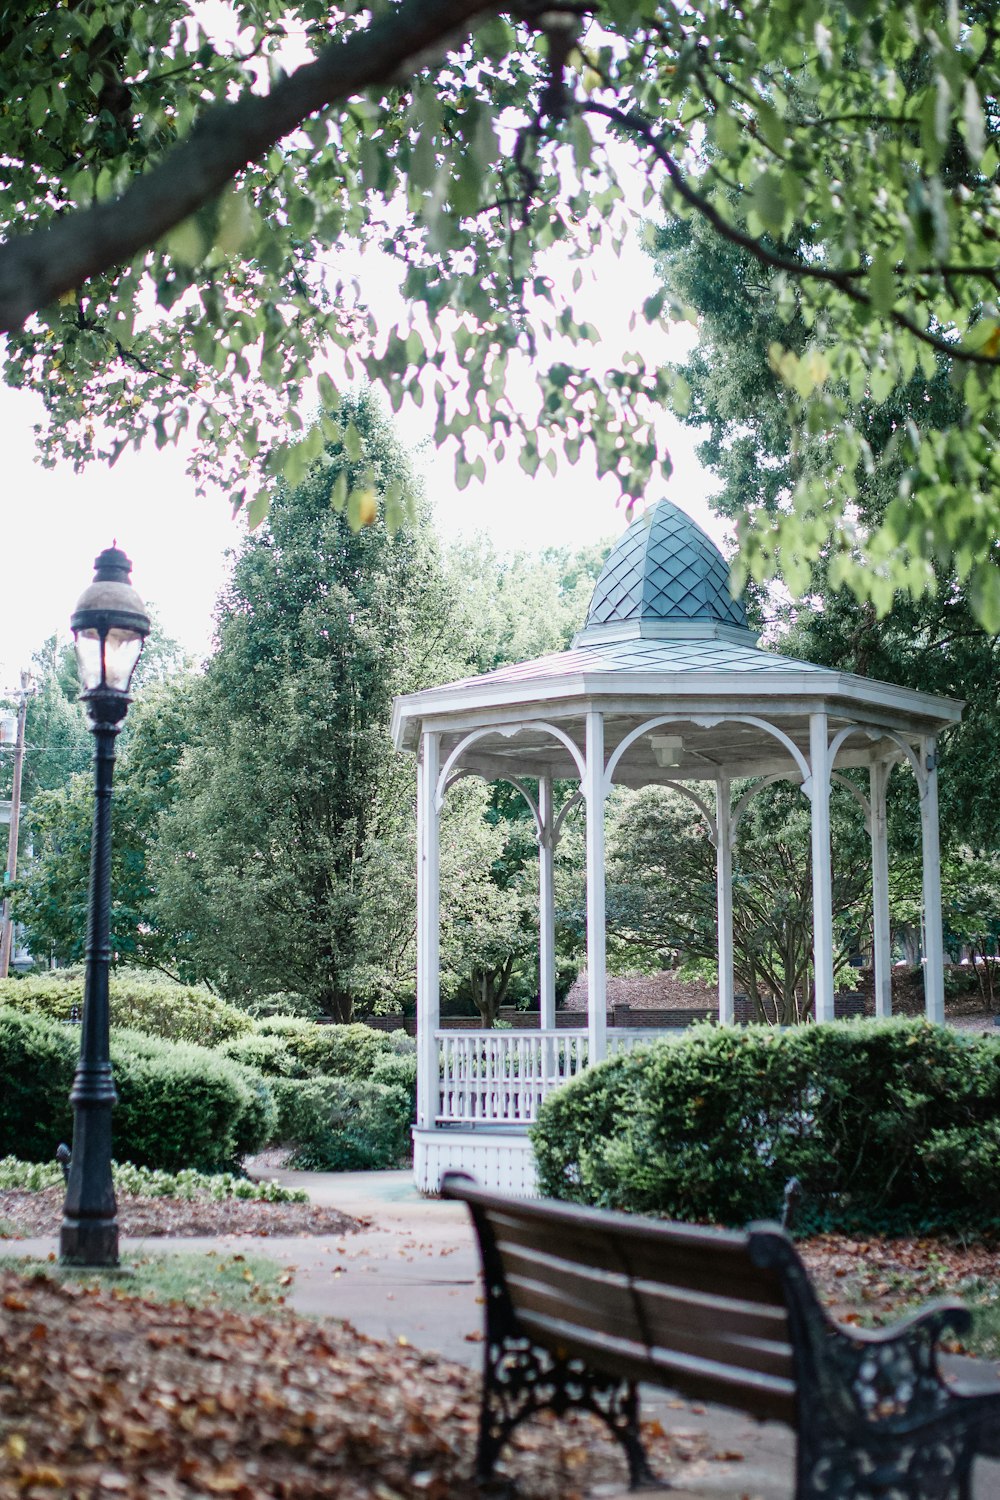 a gazebo in a park surrounded by trees and bushes